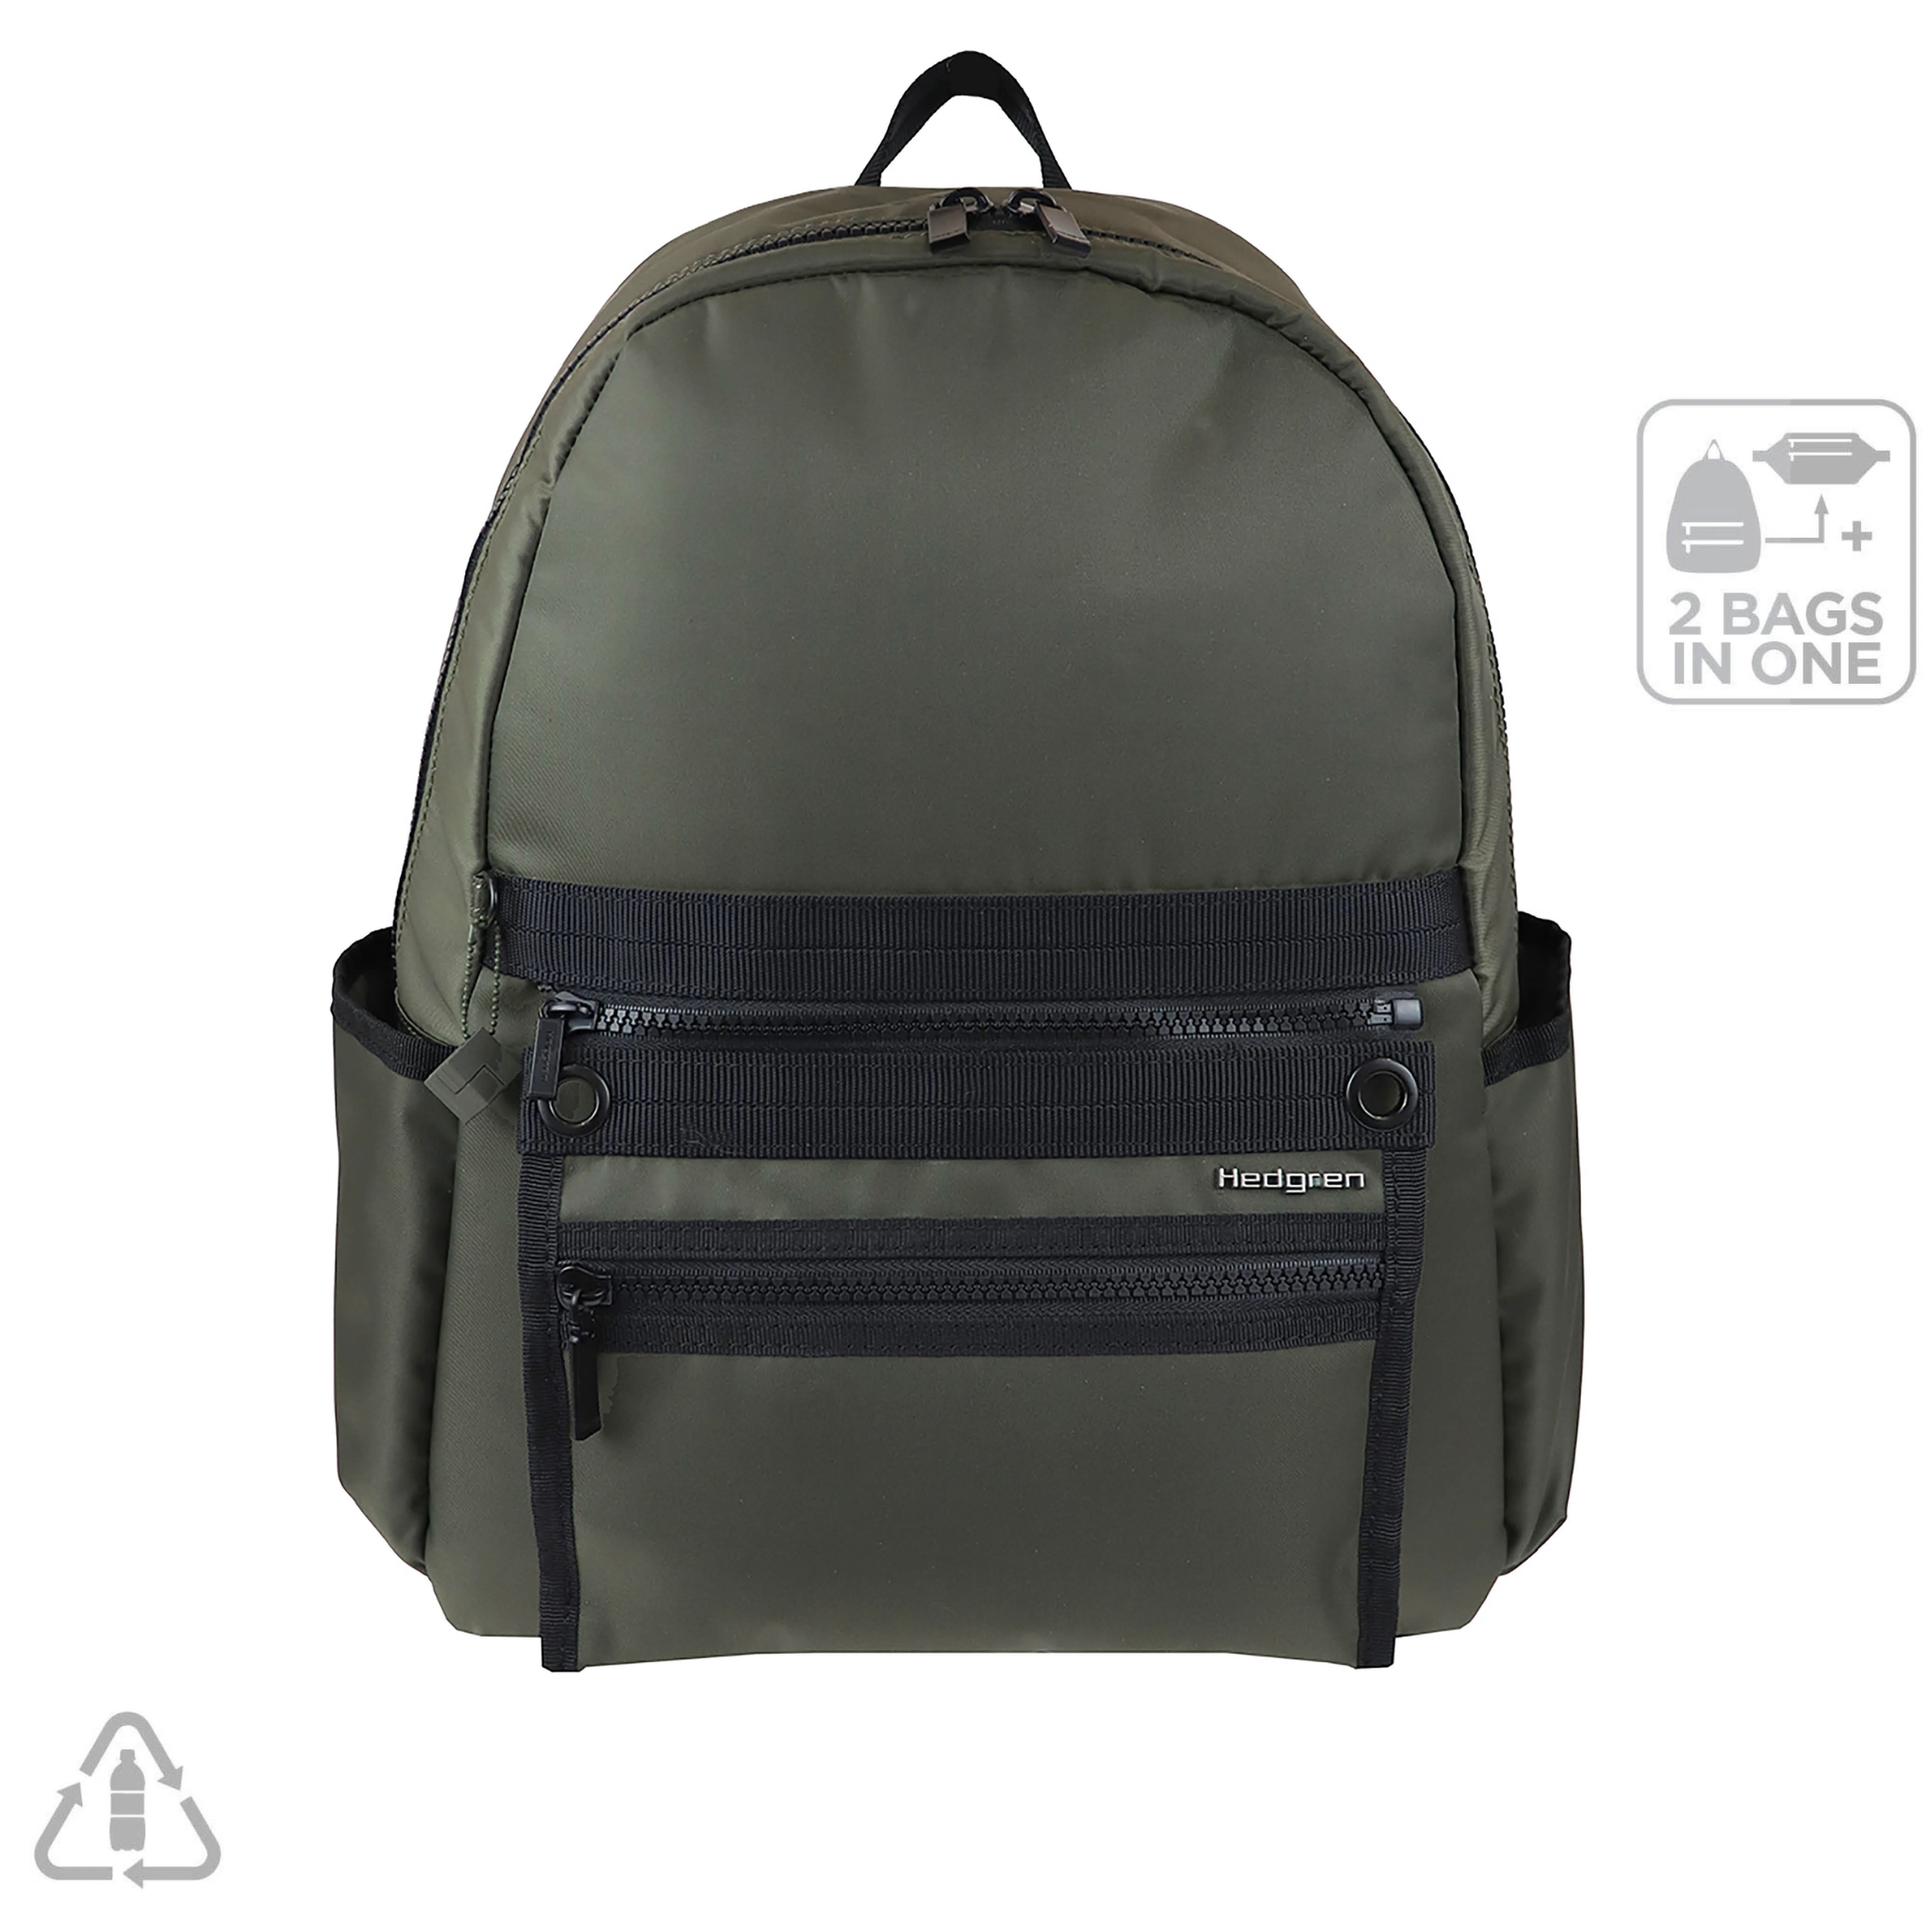 Cibola 2 in 1 Sustainably Made Backpack